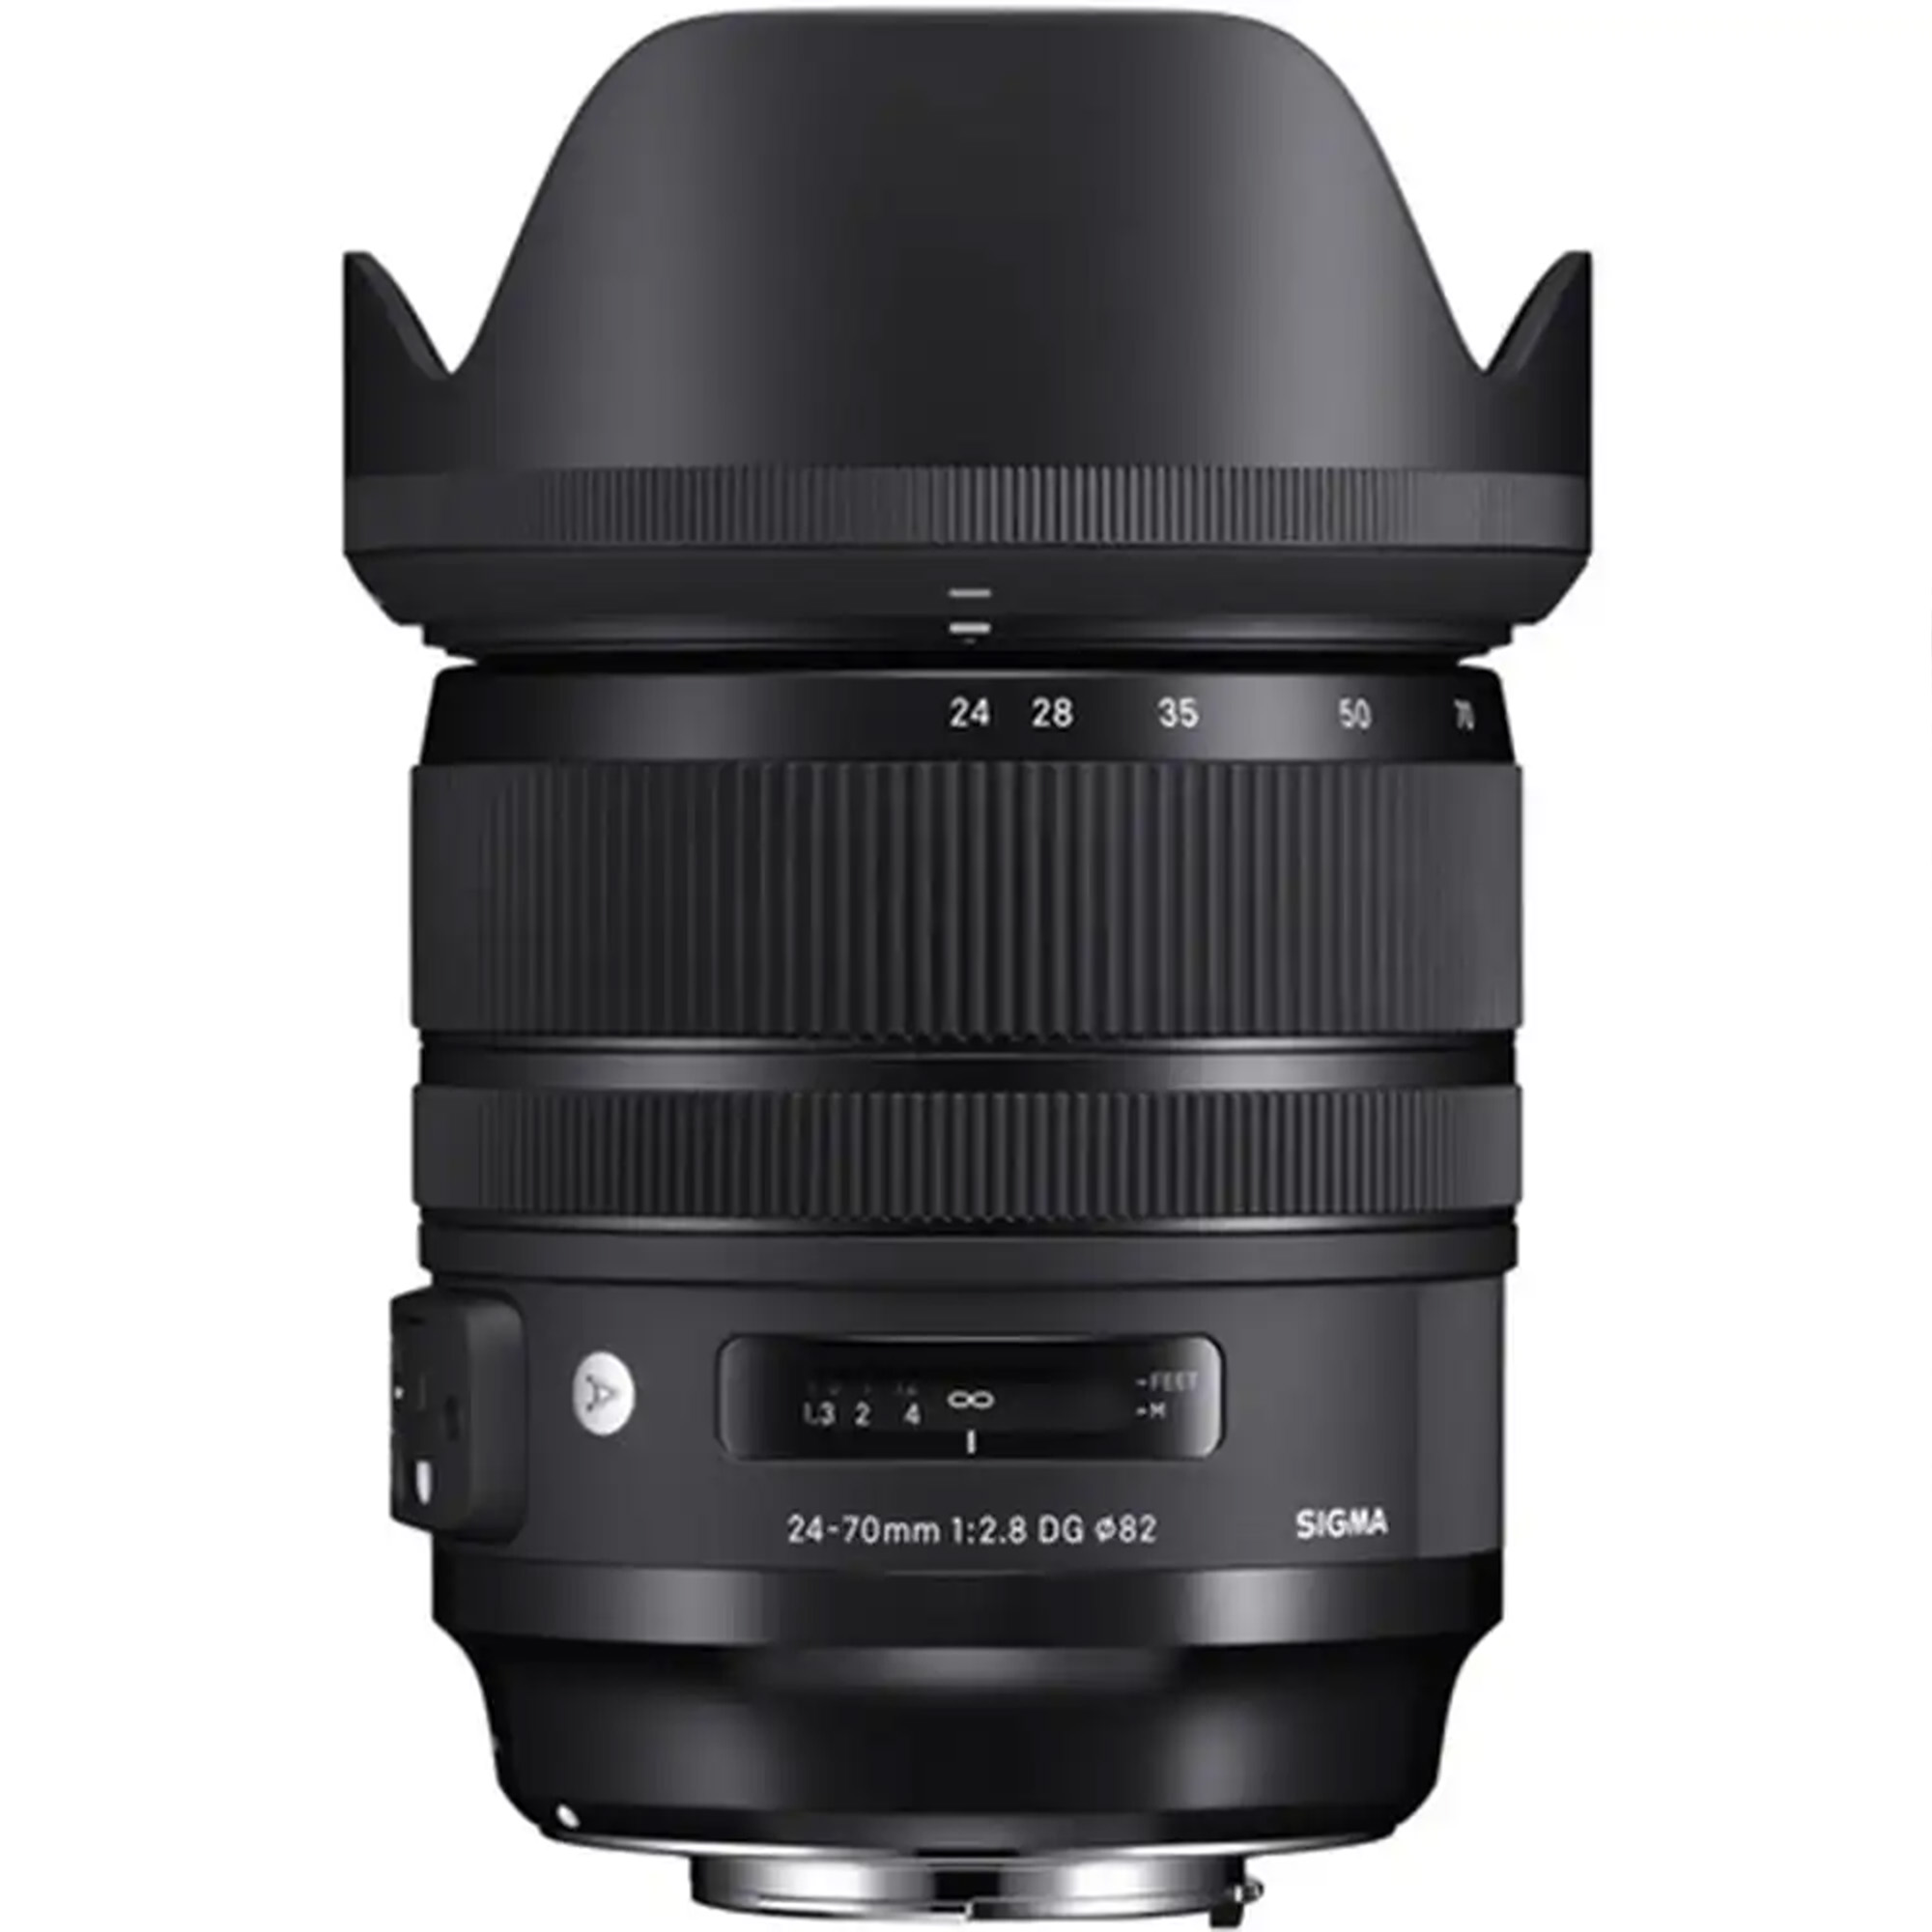 The large-diameter zoom lens for any shoot.